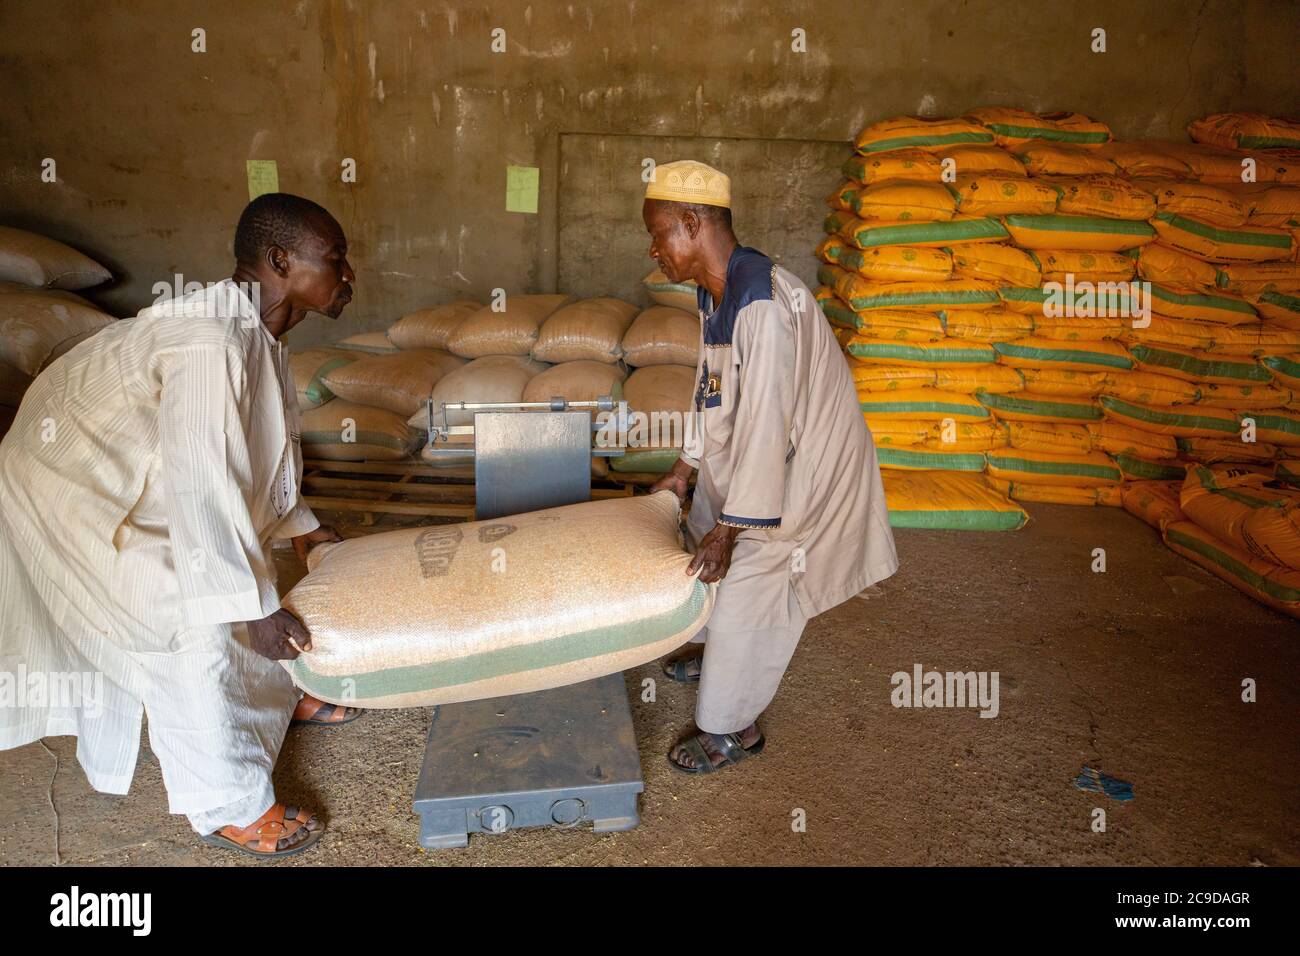 Warehouse workers Mahaman Amadou (57, R) and Muhamadou Yahaya (56, L) move sacks of maize at the headquarters of Union Adaltchi, one of Lutheran World Relief’s cooperative partners in Tahoua Region, Niger. Alliance 12/12 Project - Niger, West Africa. September 21, 2018. Photo by Jake Lyell for Lutheran World Relief. Stock Photo